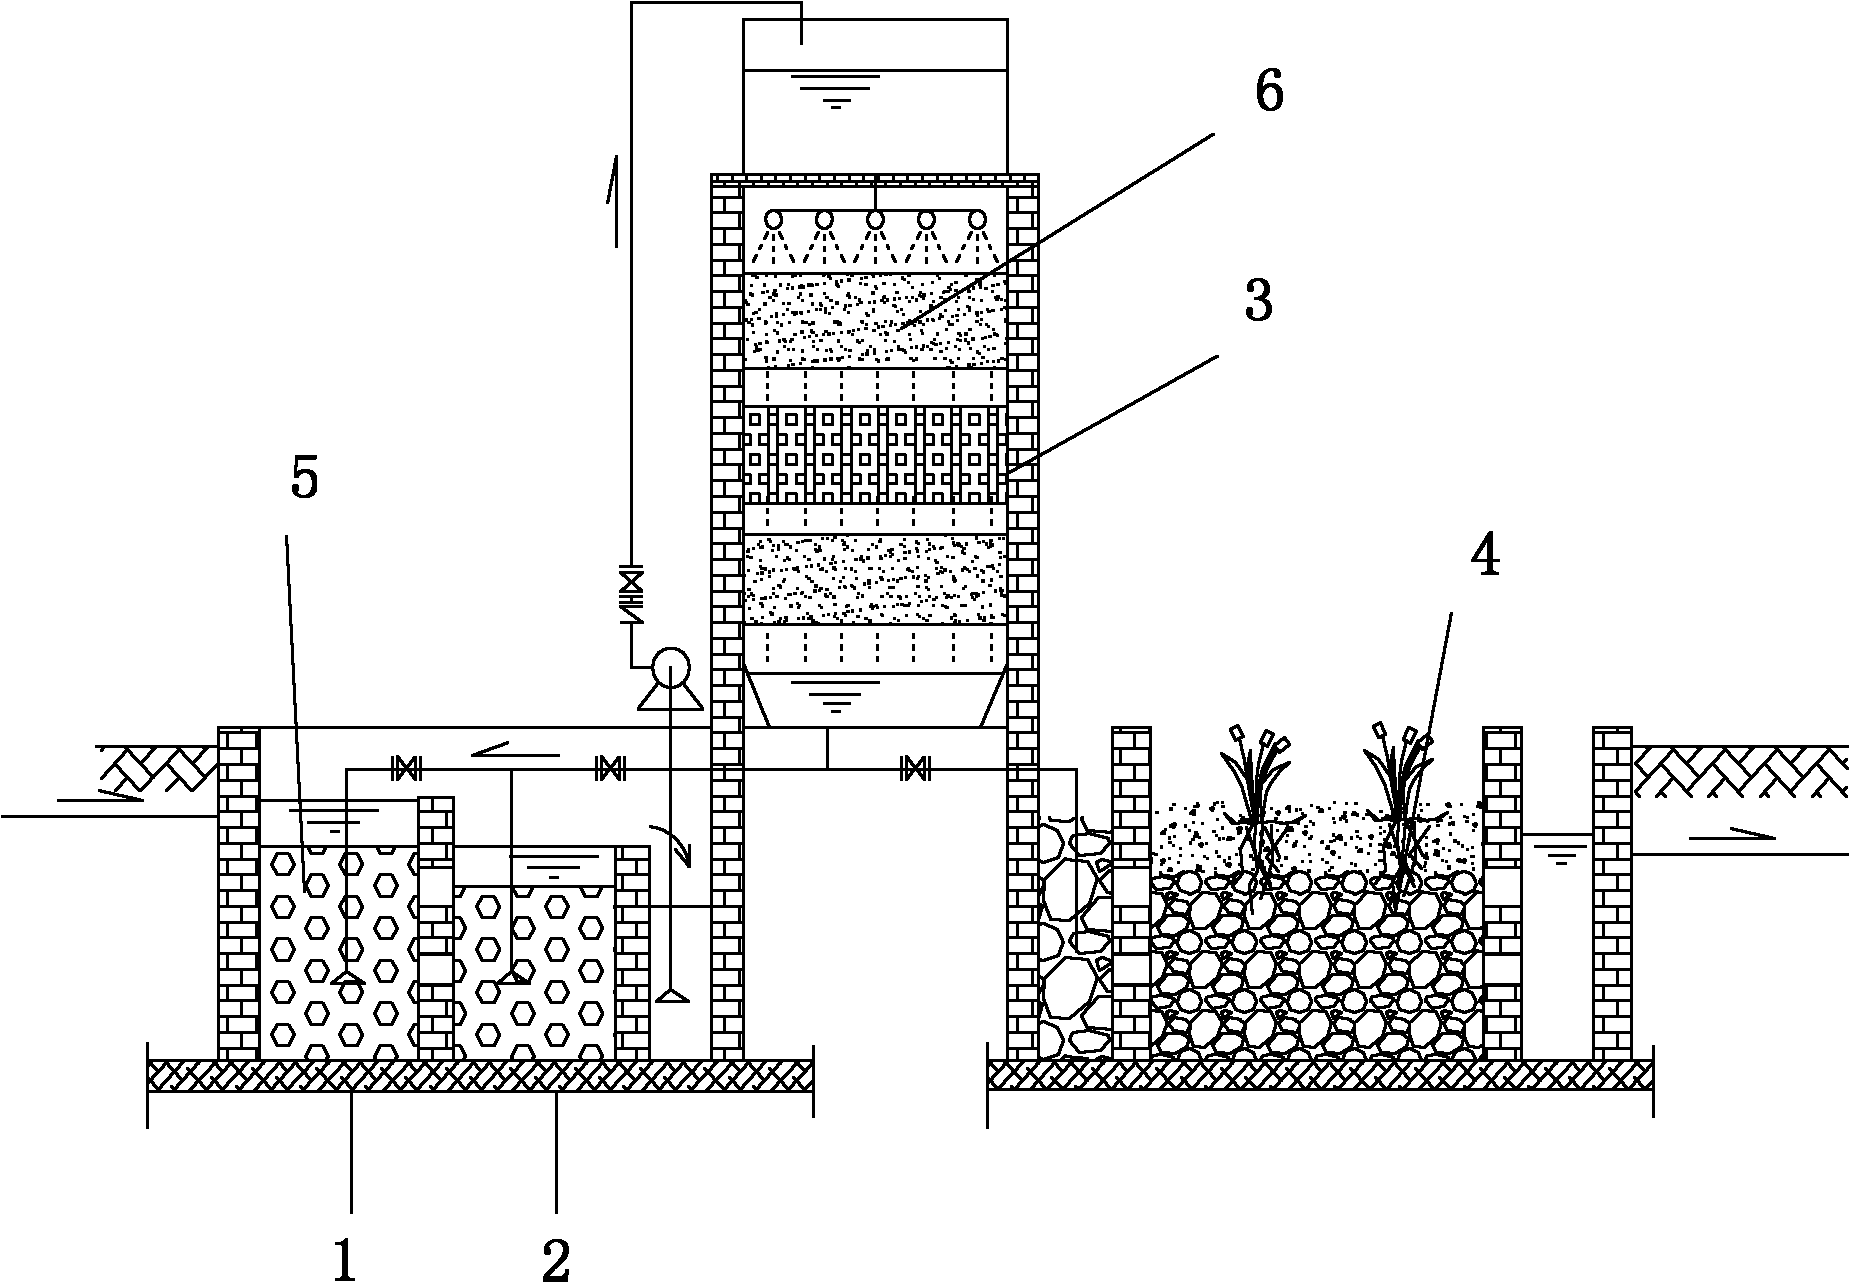 Two-stage anaerobic-tower type filter chamber livestock/poultry wastewater treatment system and treatment process